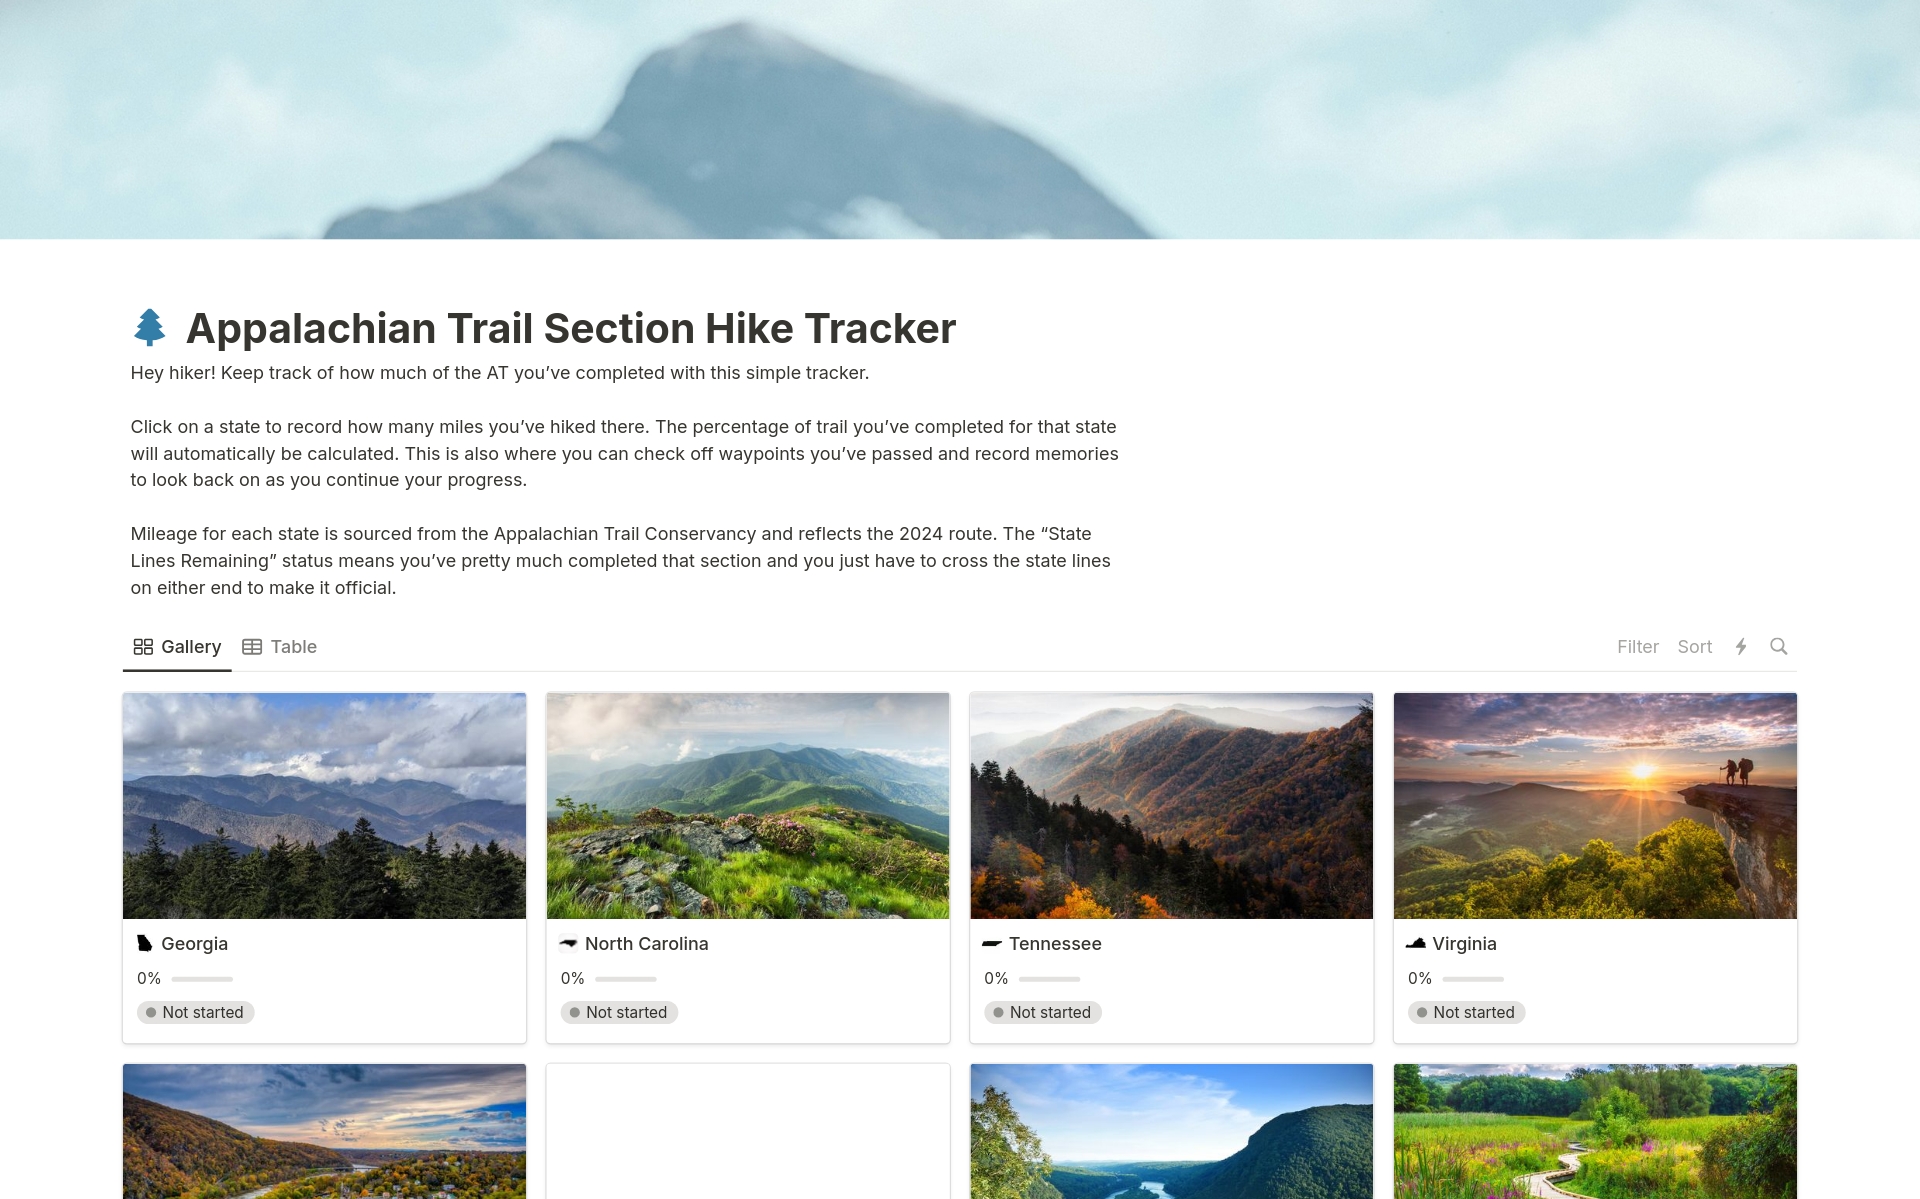 The Appalachian Trail is long. Hiking it in sections can take decades. This Notion template makes it easy check off waypoints, record memories, and log miles completed all on one place.